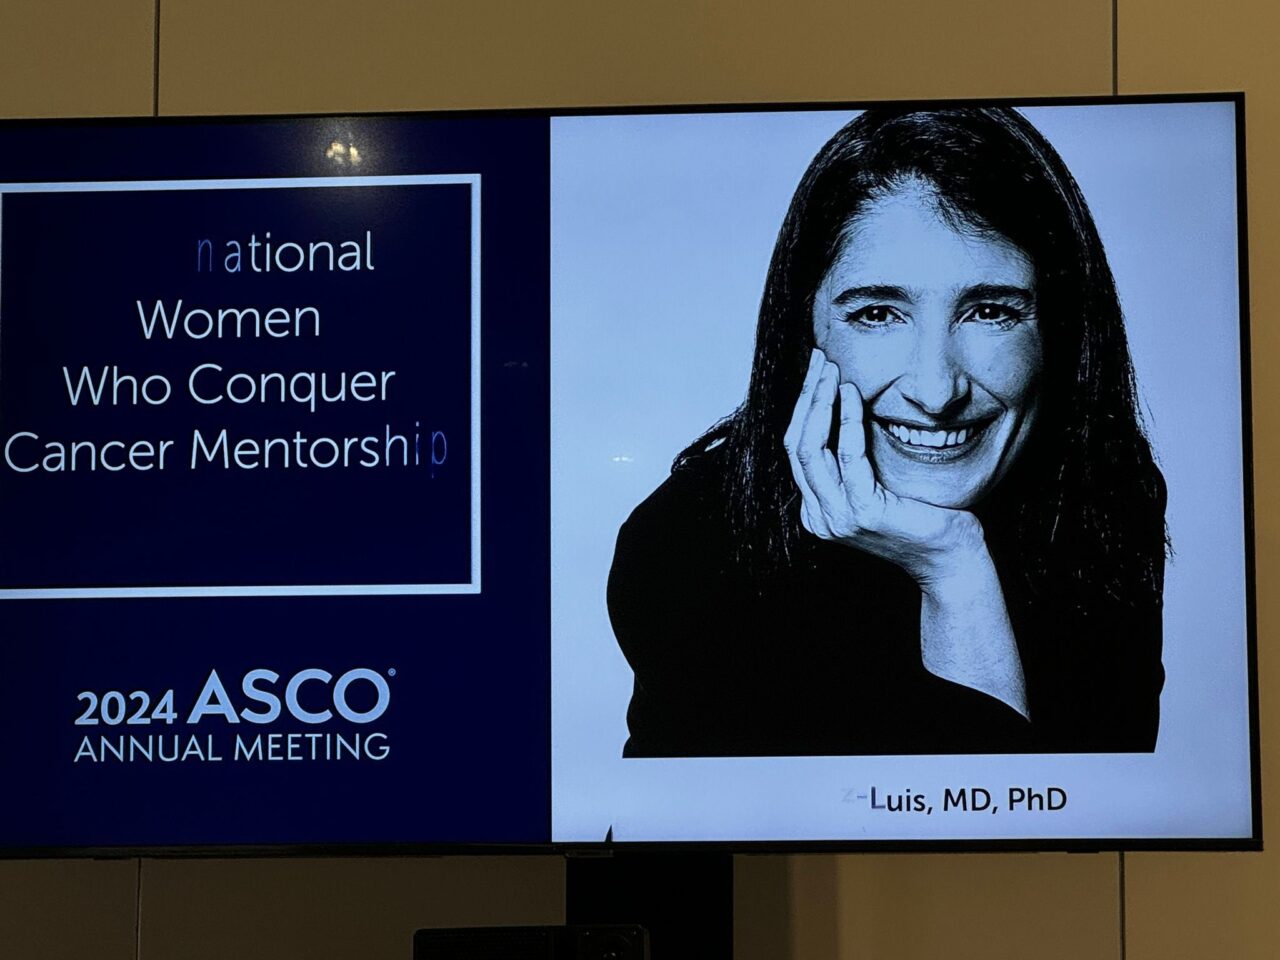 Ines Vaz Luis: Such an honor to receive a mentorship award